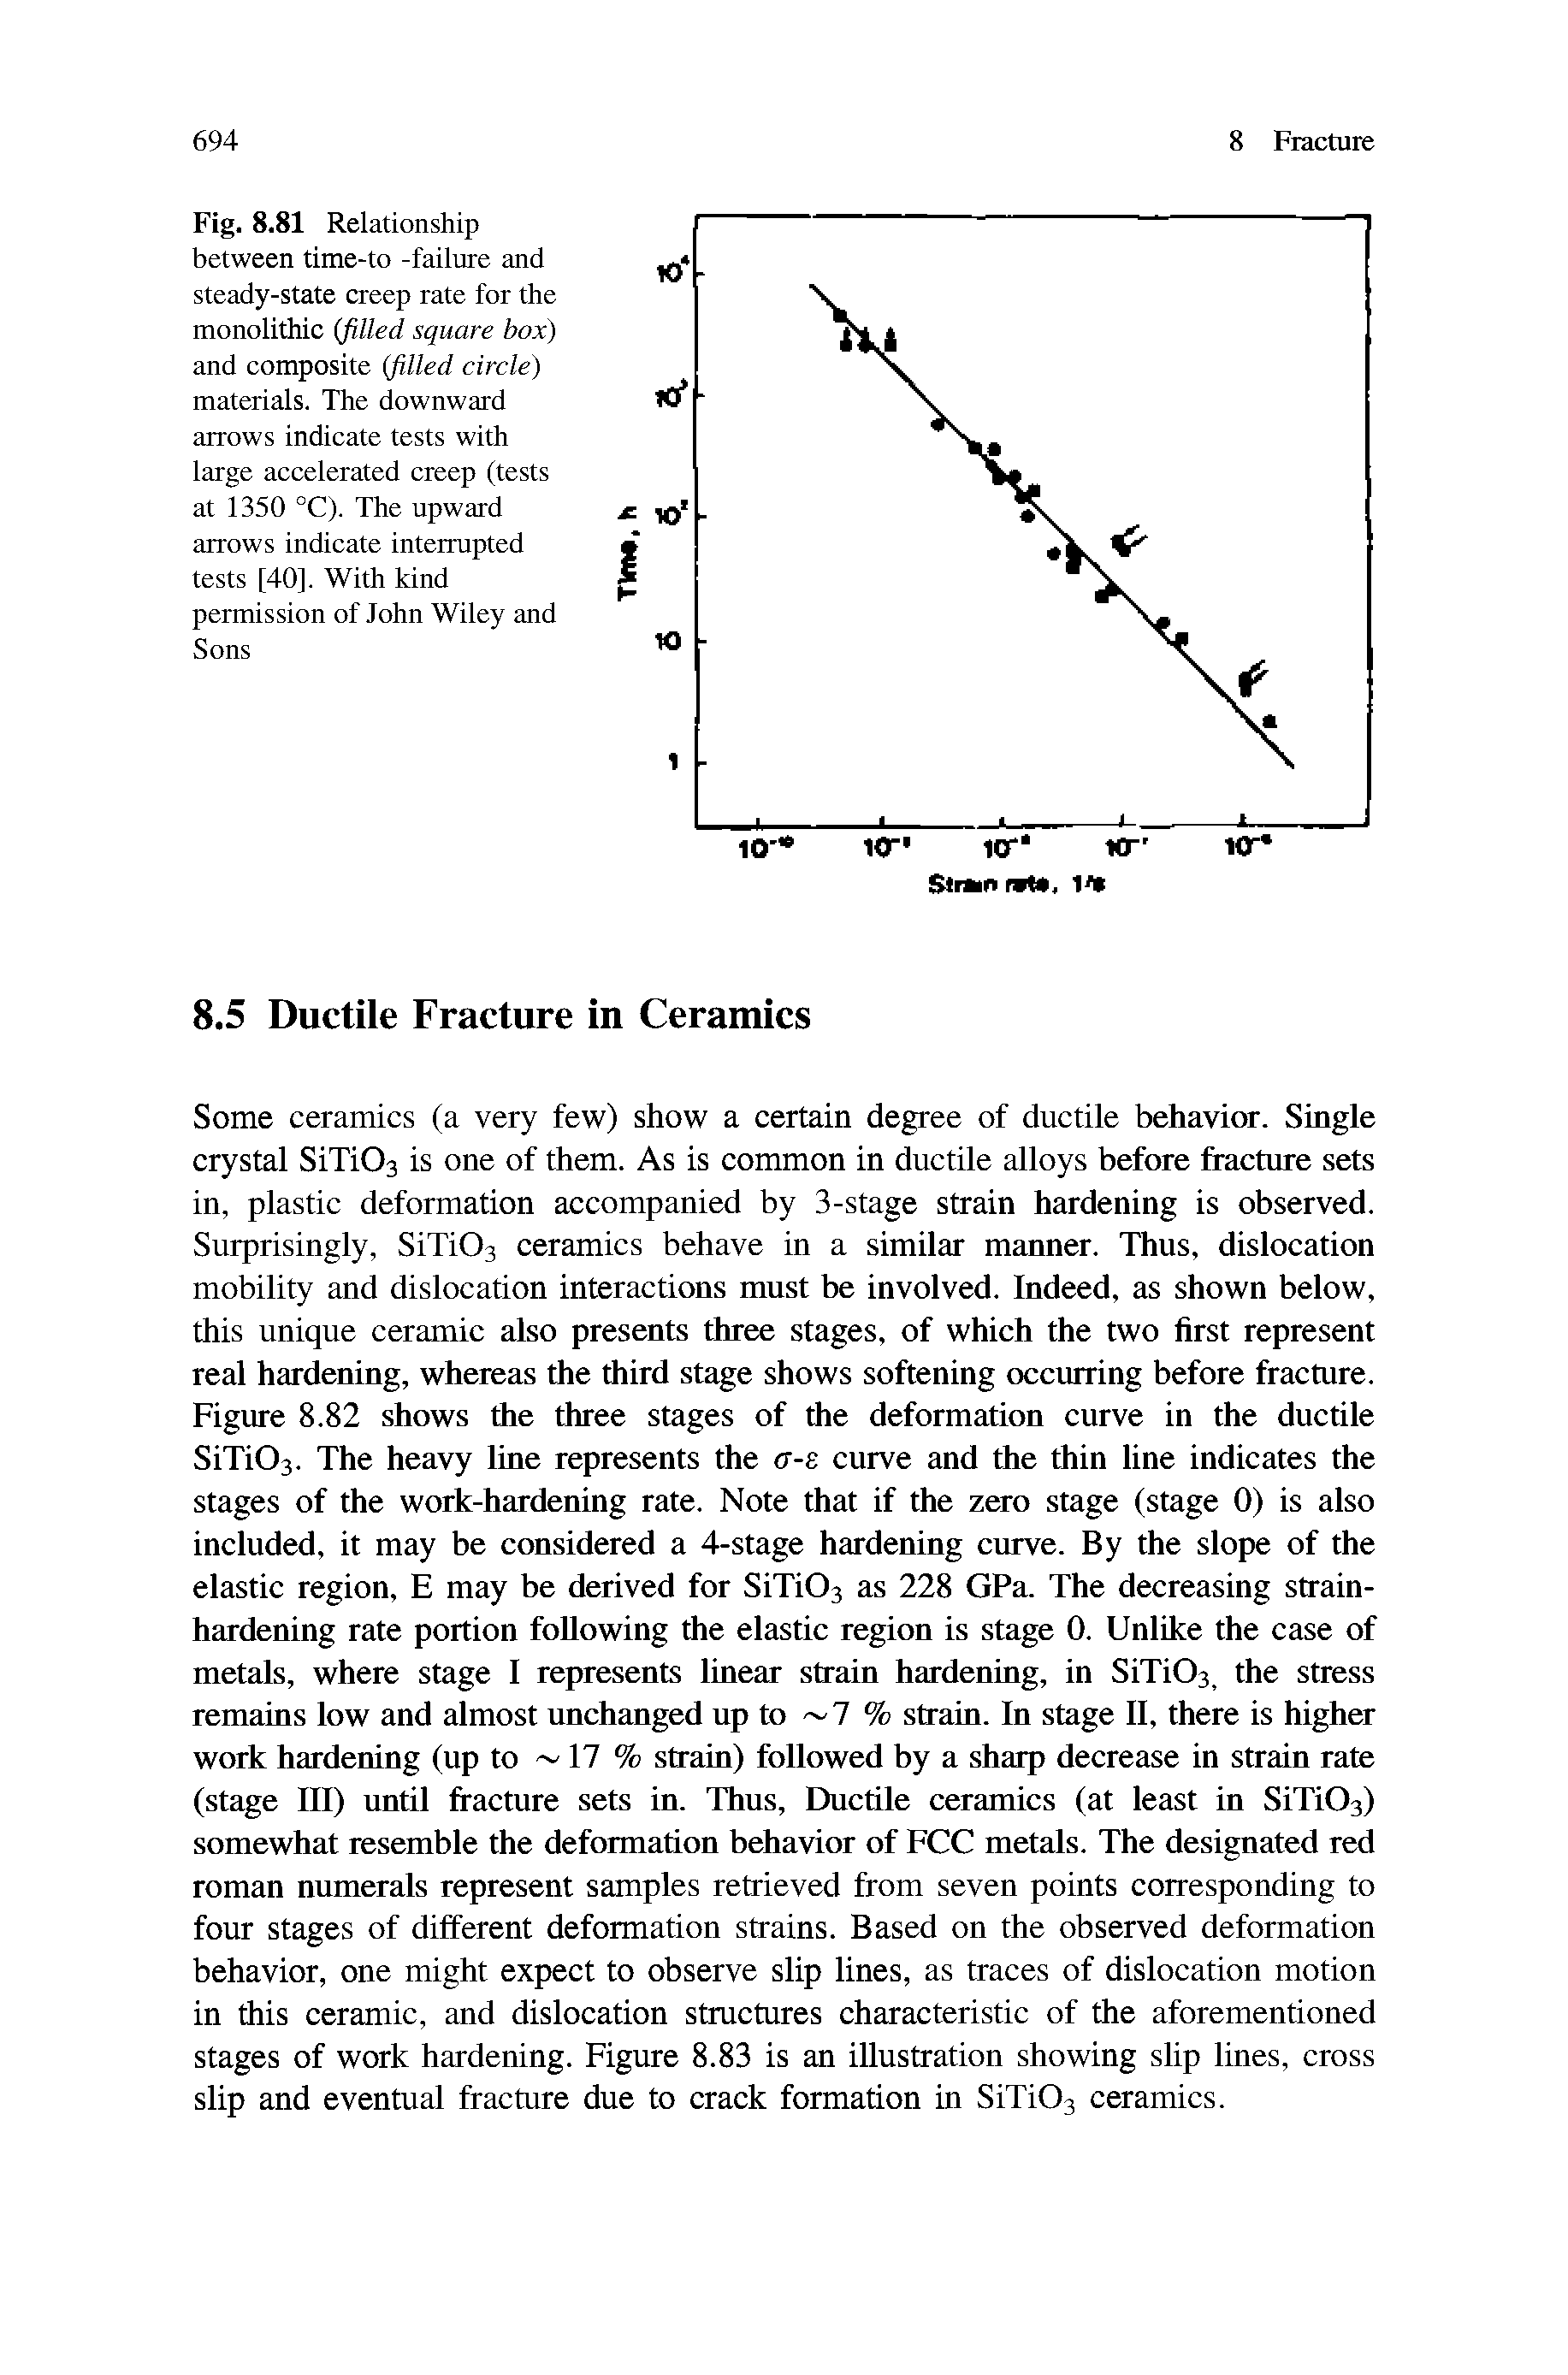 Fig. 8.81 Relationship between time-to -failure and steady-state creep rate for the monolithic (filled square box) and composite (filled circle) materials. The downward arrows indicate tests with large accelerated creep (tests at 1350 °C). The upward arrows indicate interrupted tests [40]. With kind permission of John Wiley and Sons...